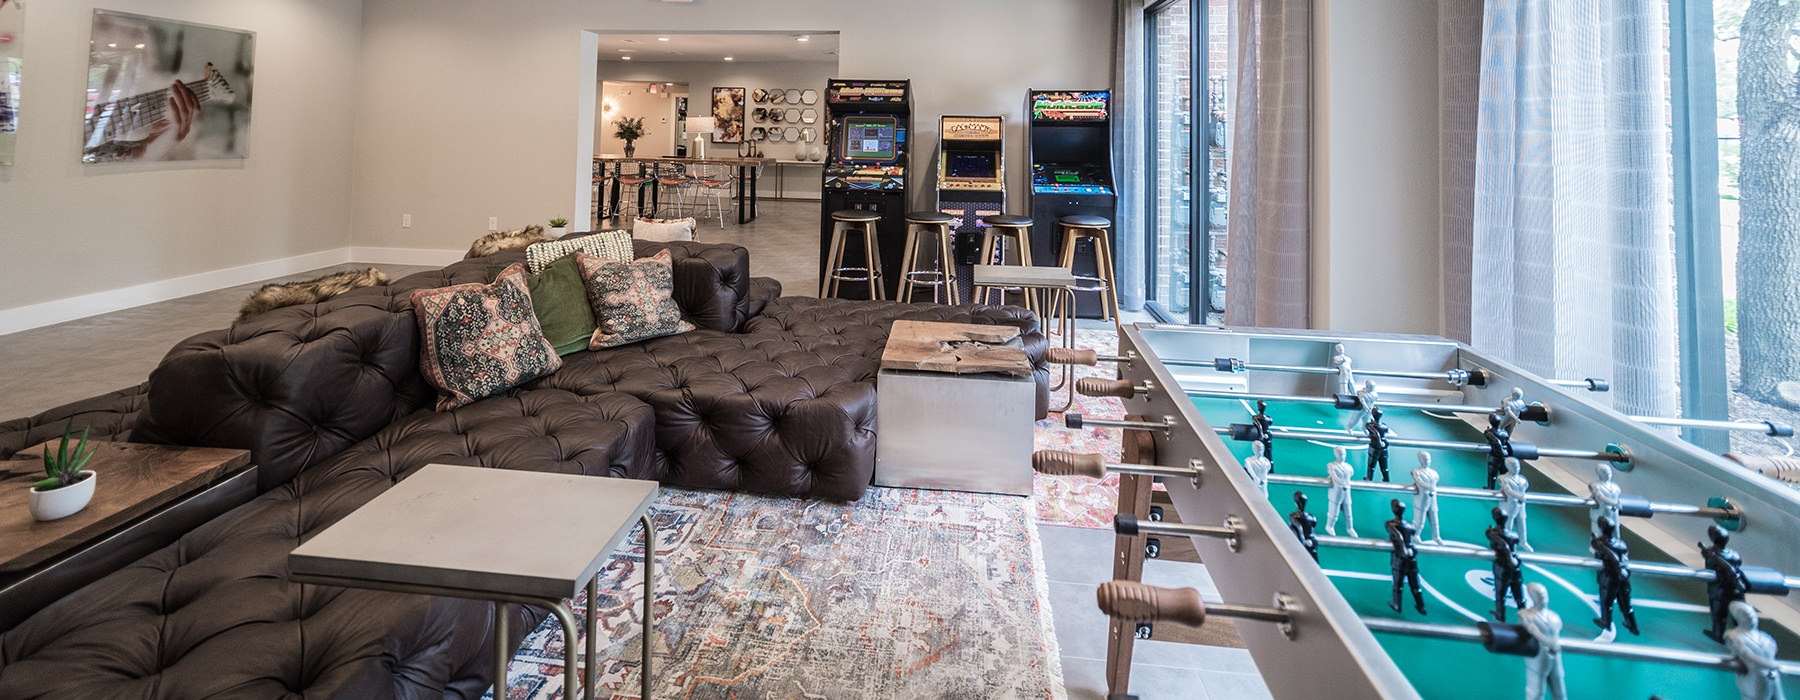 Large game room with large windows and foosball tables